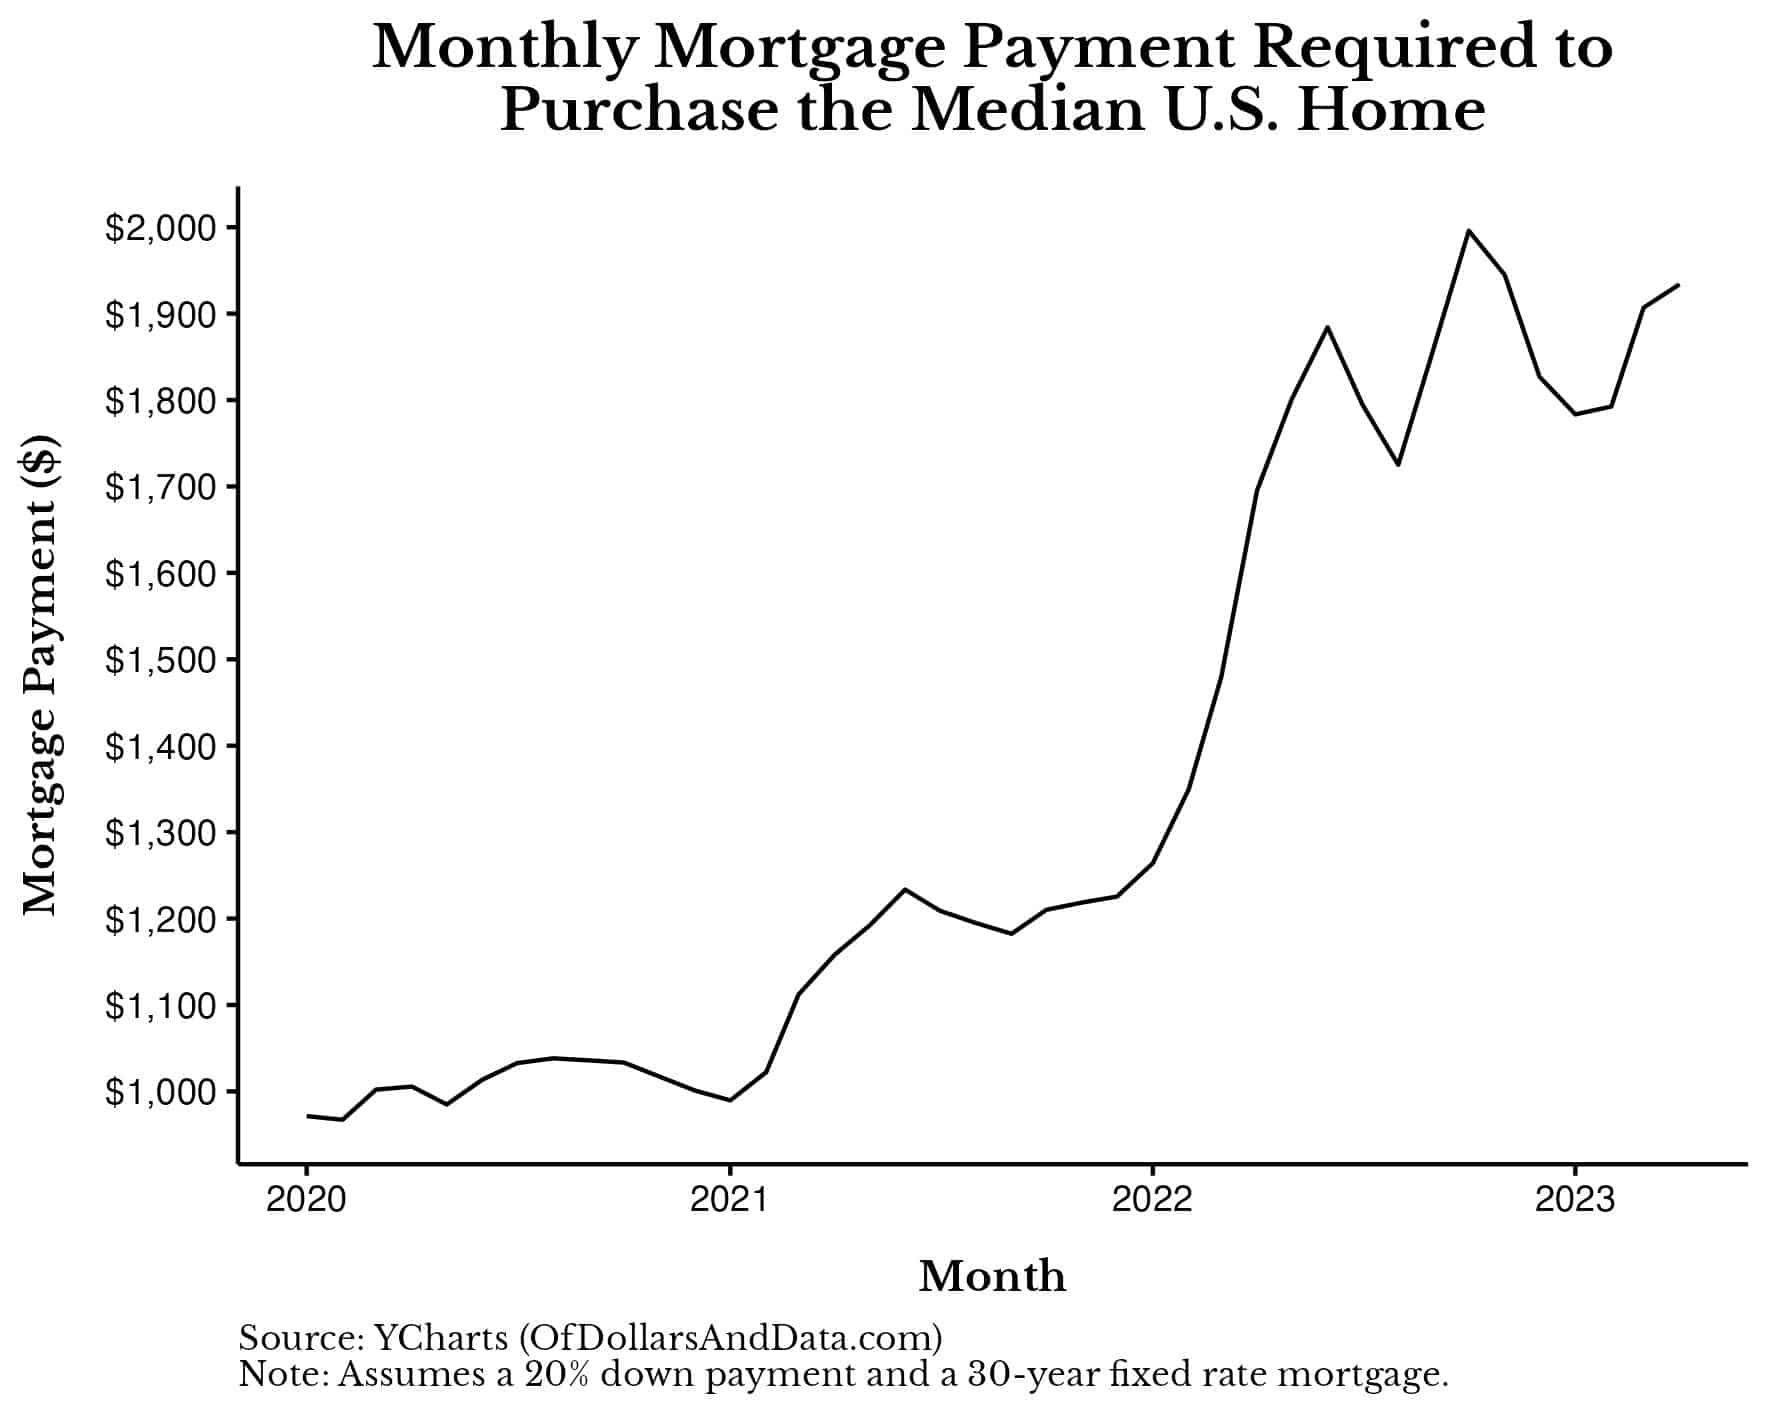 Chart of monthly mortgage payment required to purchase the median U.S. home from January 2020 to April 2023.